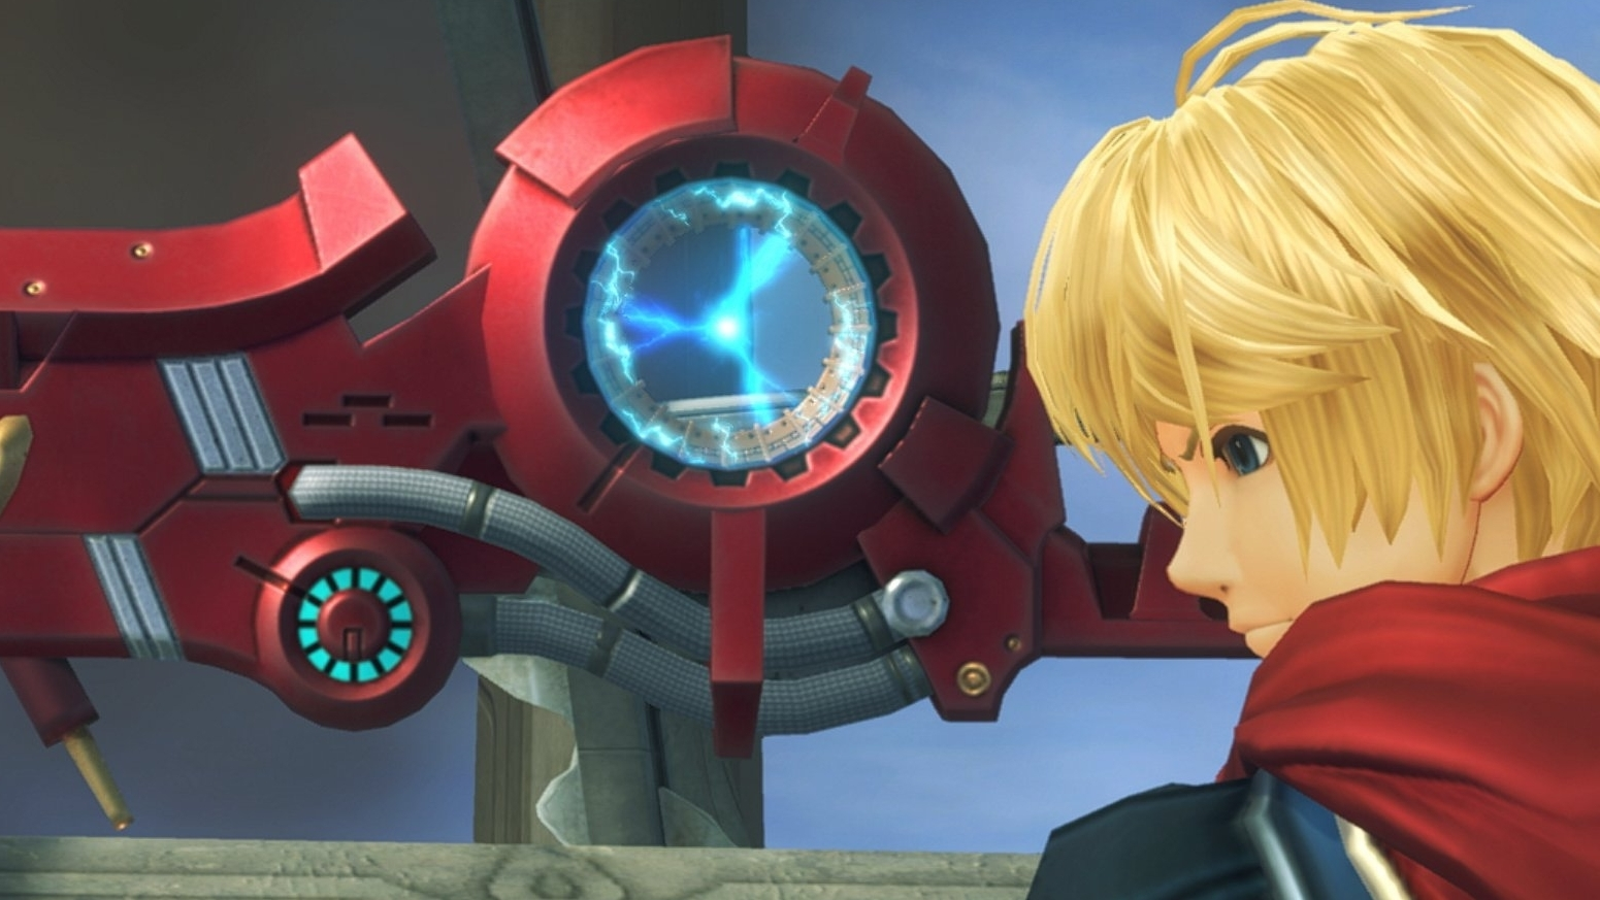 Xenoblade Chronicles: Definitive Edition (for Nintendo Switch) Review